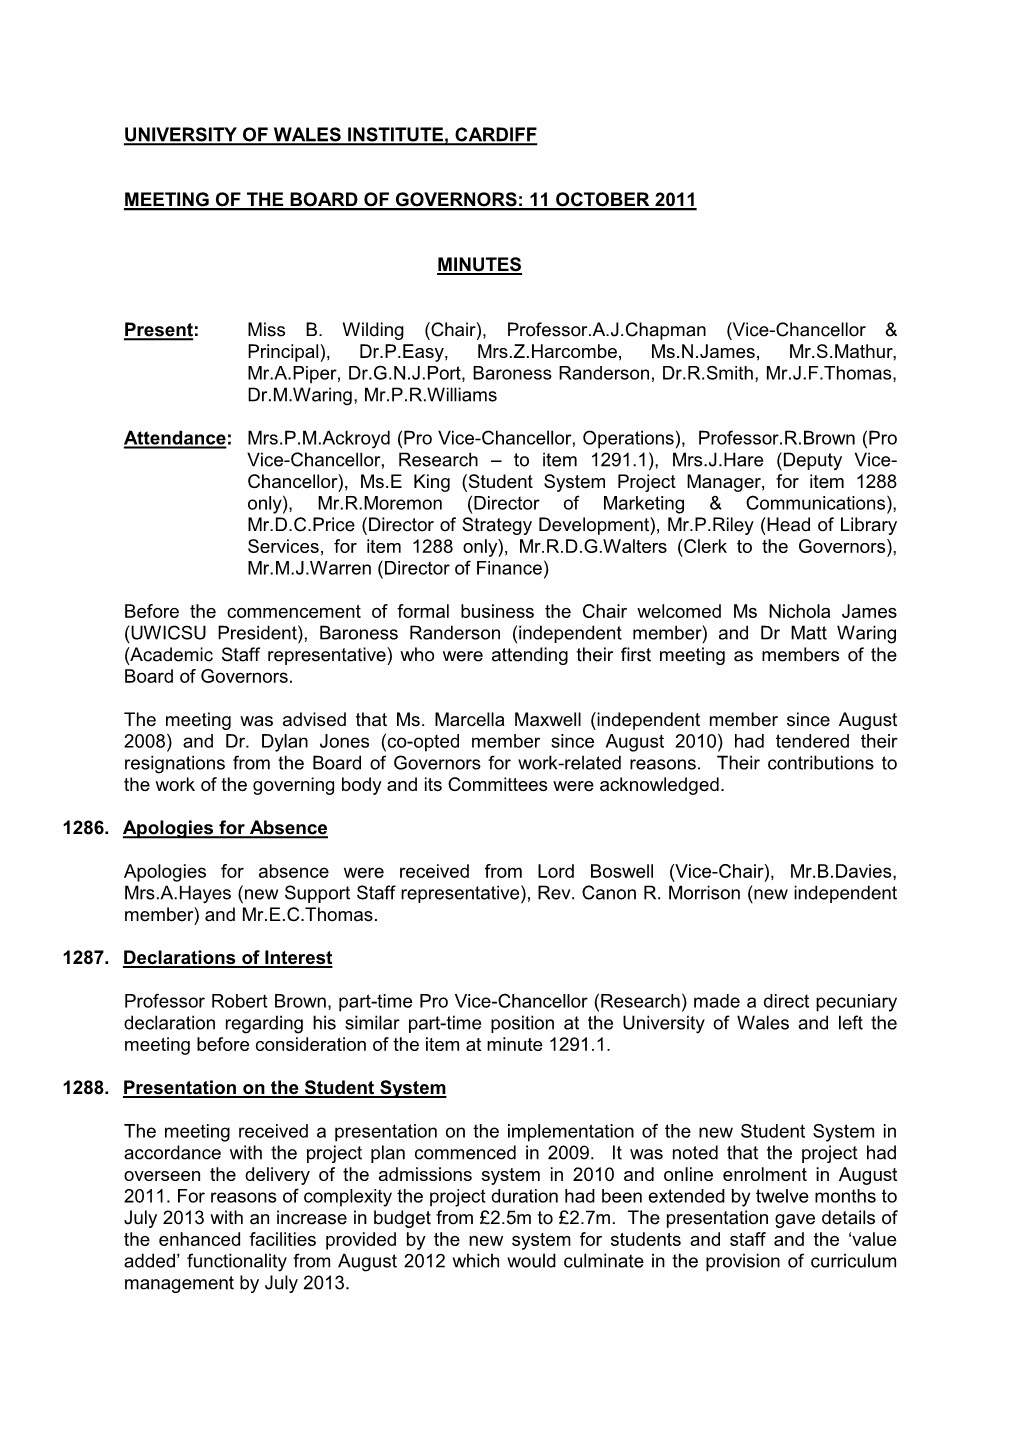 Minutes of Board of Governors Meeting: 11 October 2011